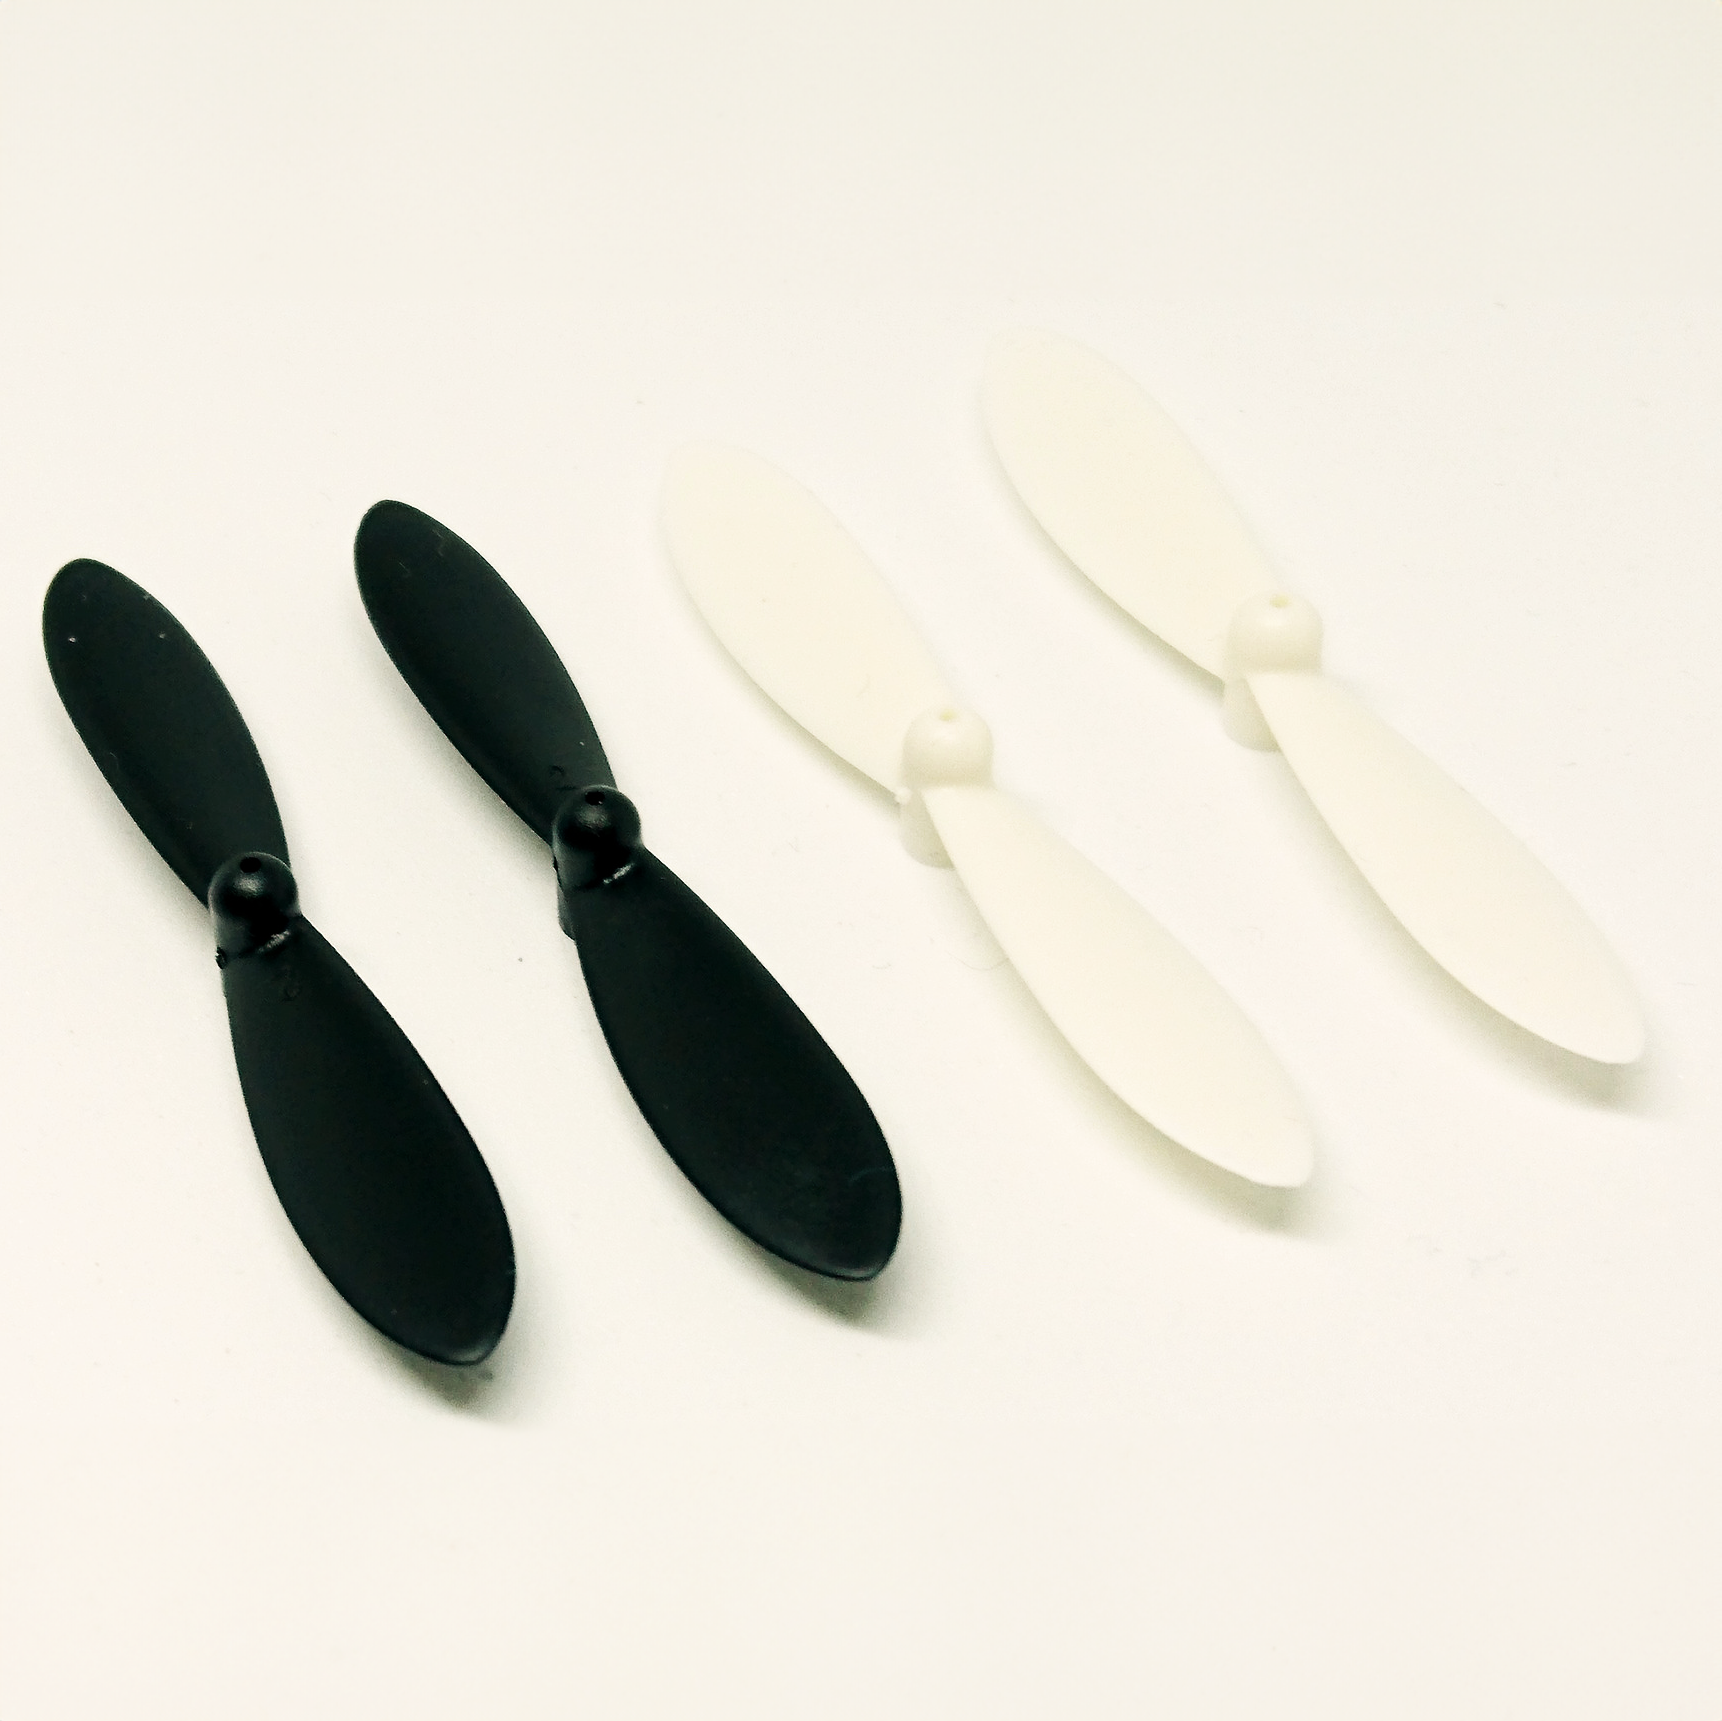 4 + 4 propellers to hummingbird (microde)